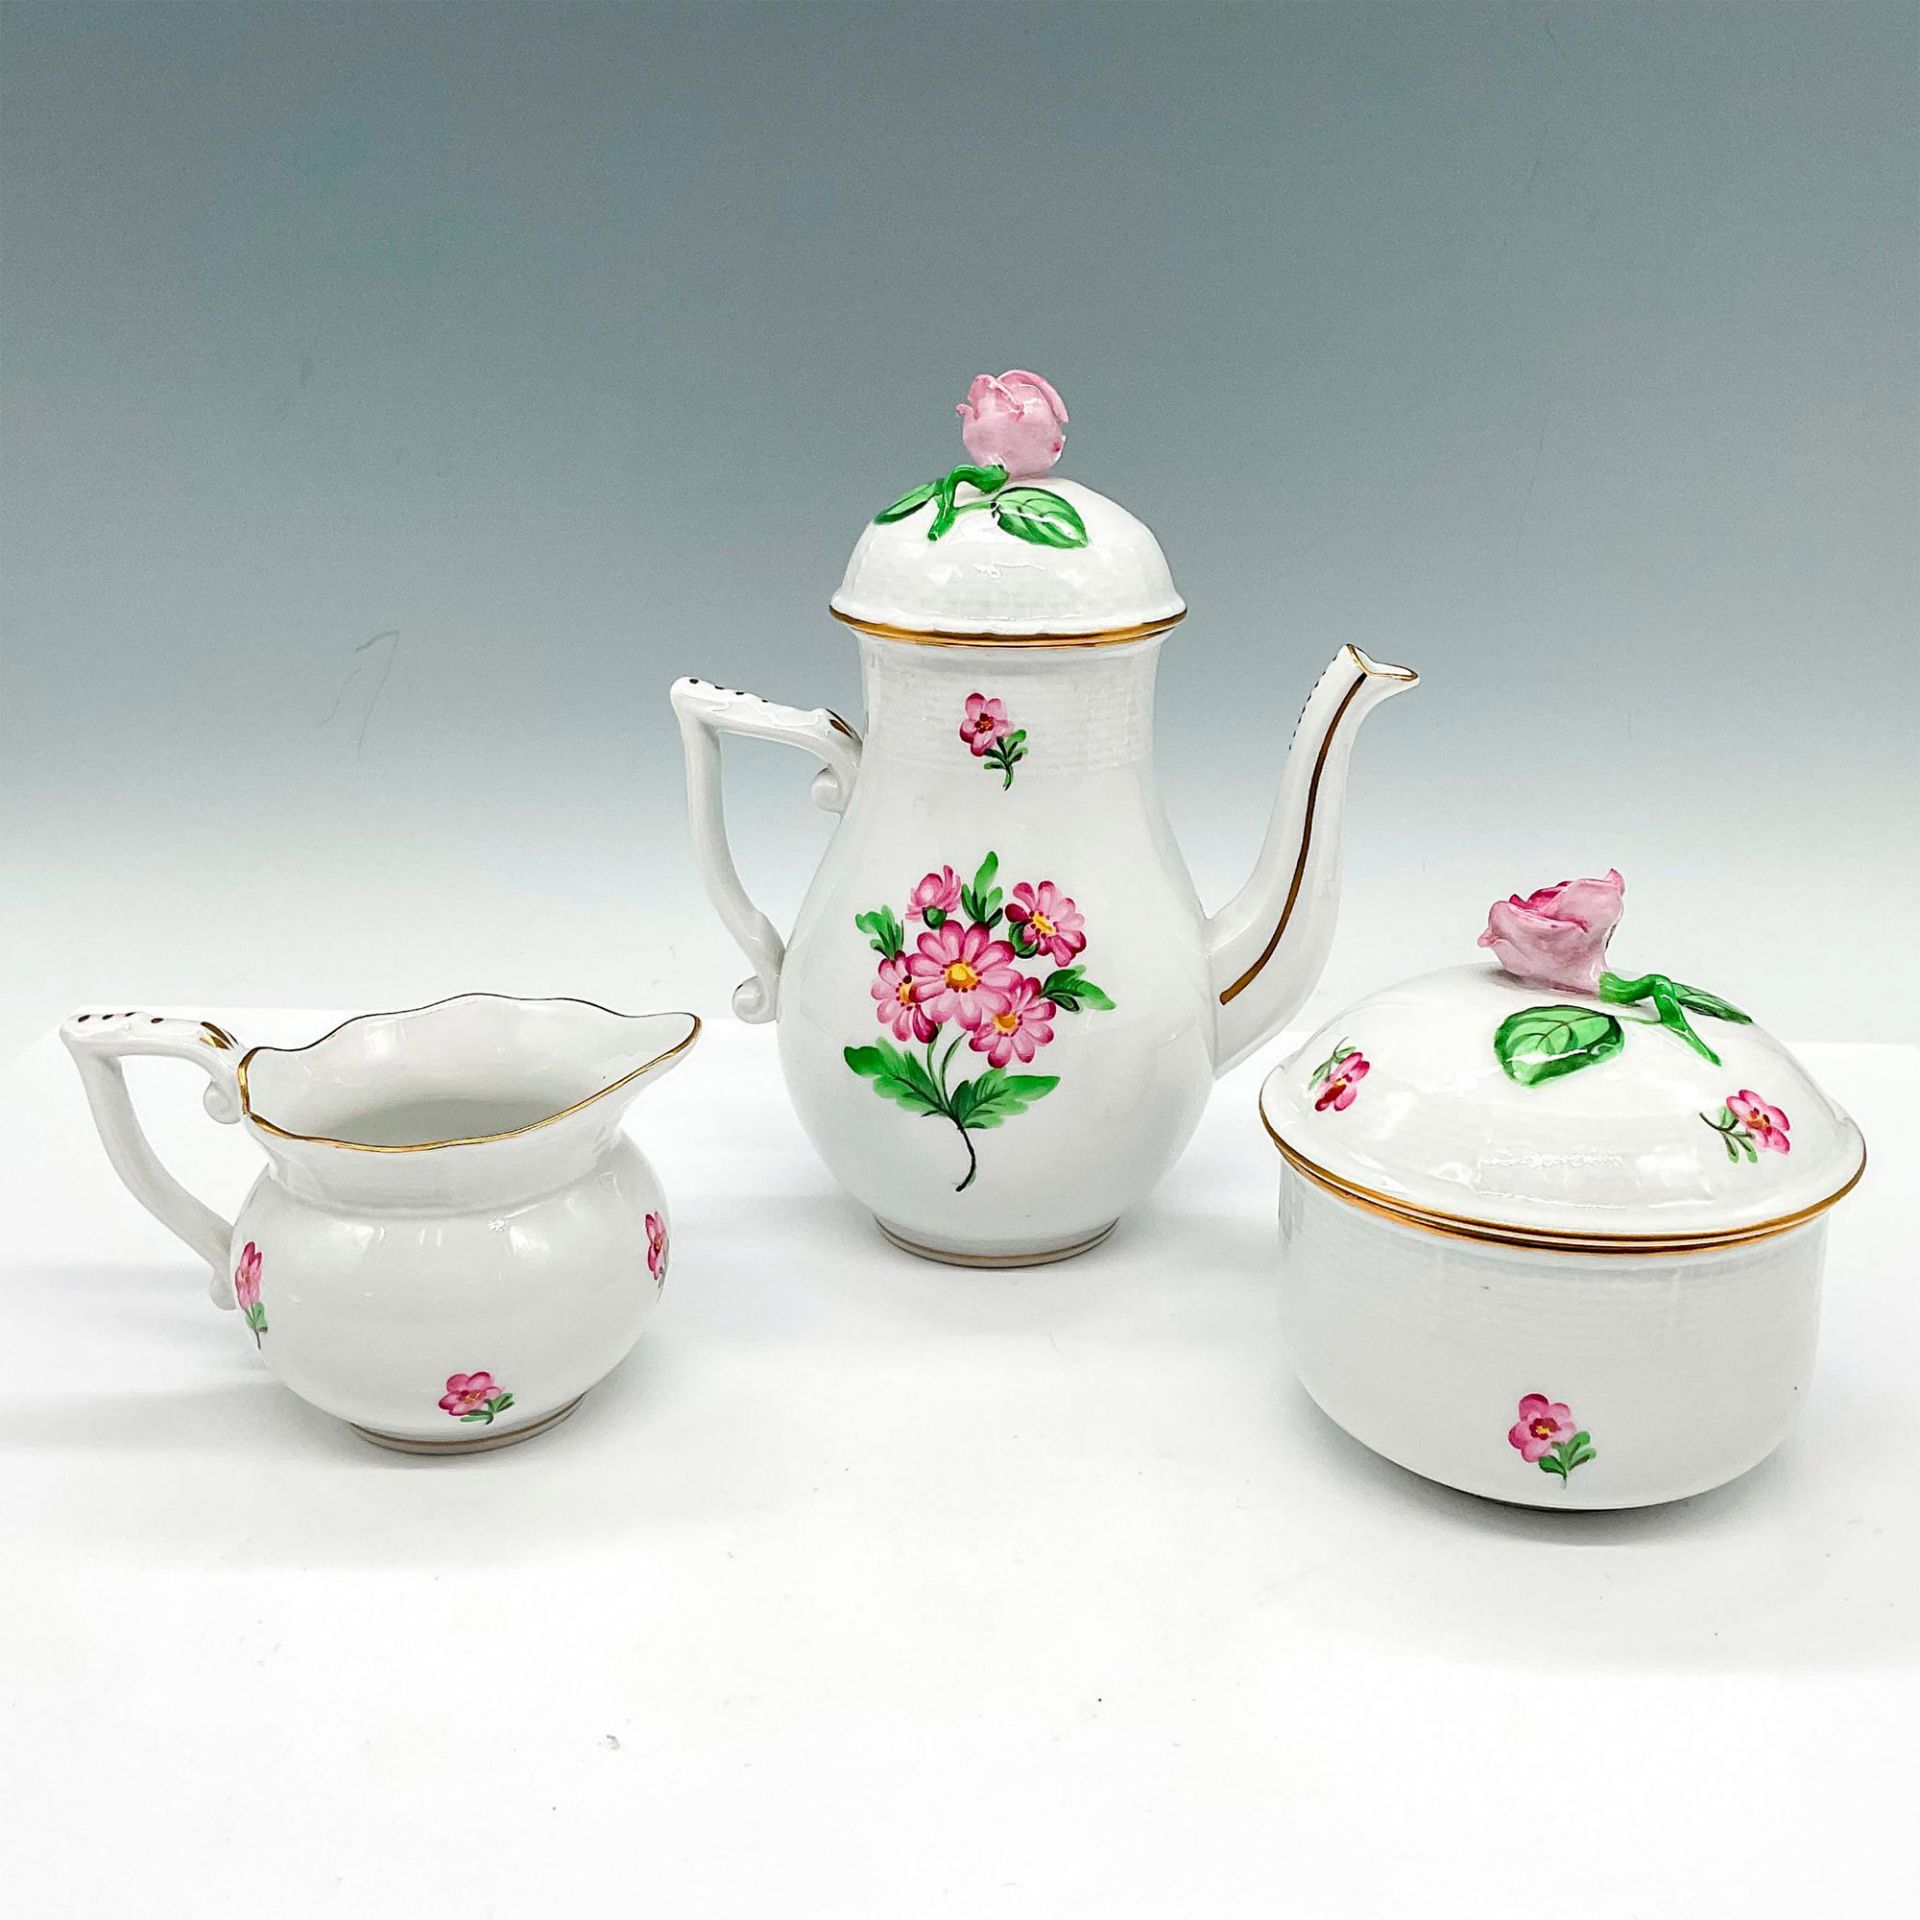 3pc Herend Porcelain Coffee Service Set, Pink Flowers - Image 2 of 3